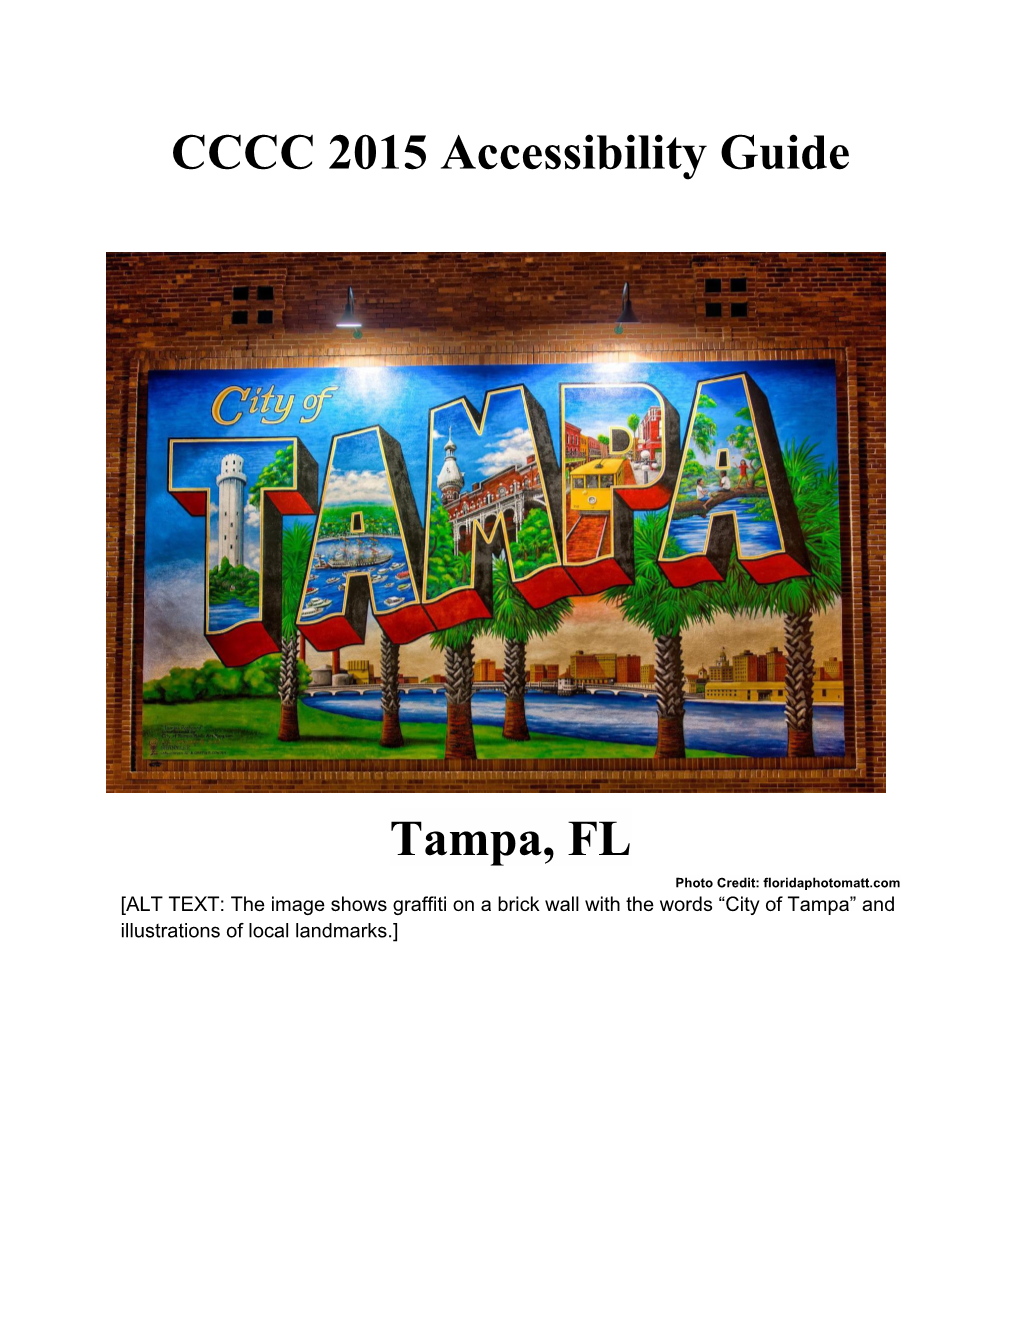 CCCC Tampa Accessibility Guide